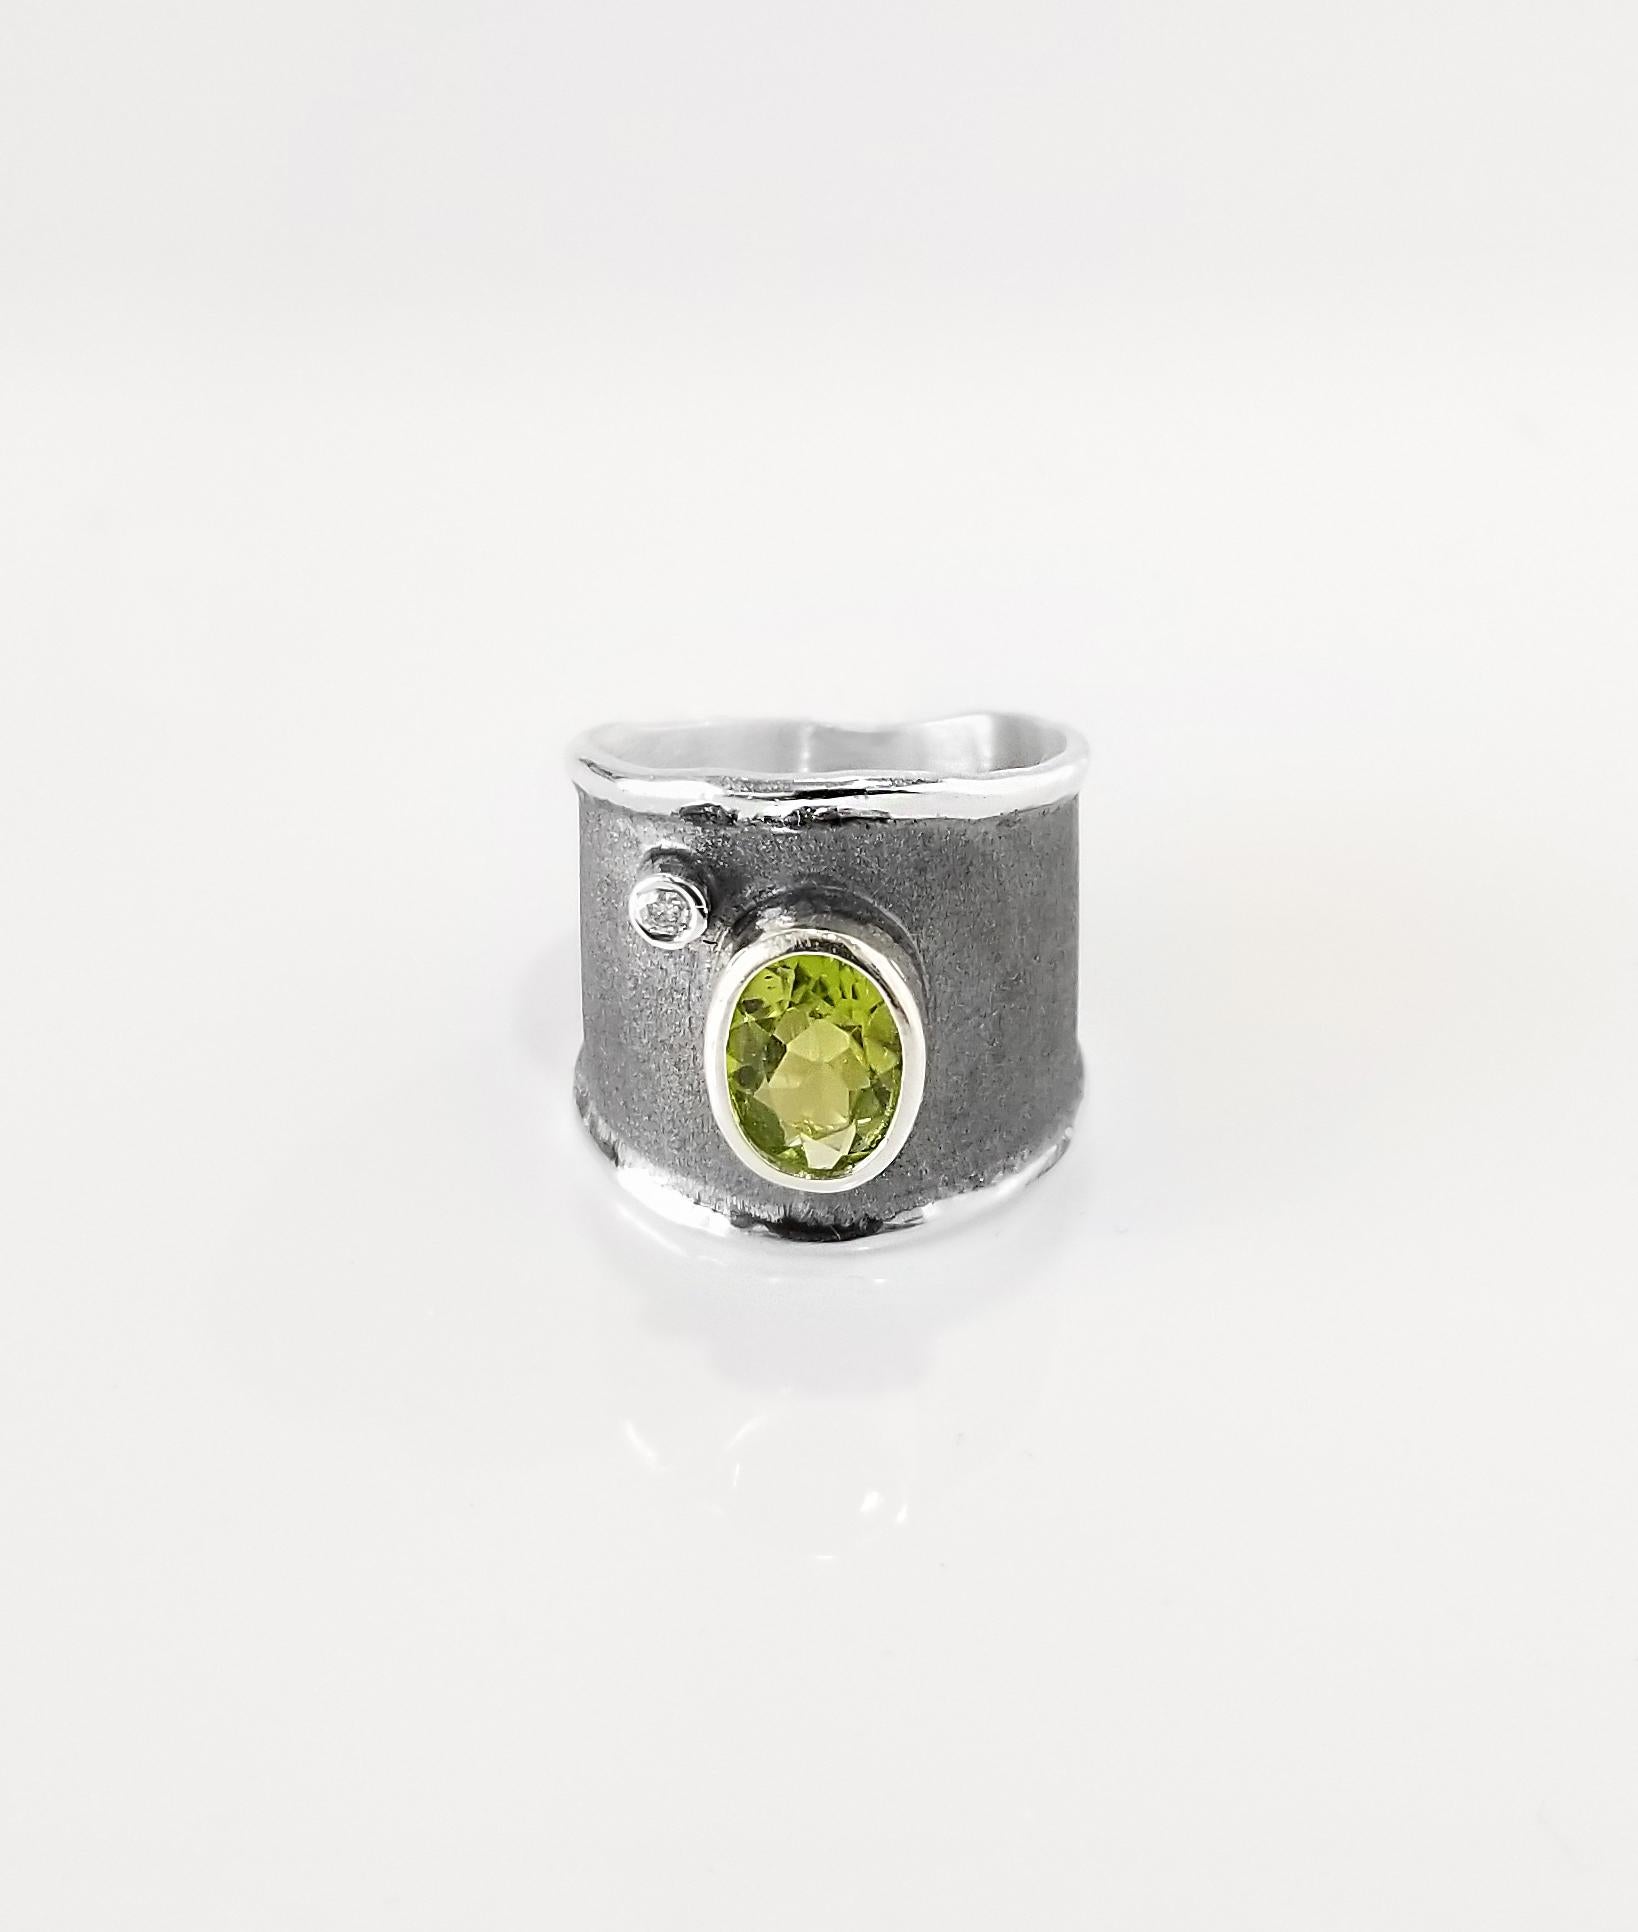 Yianni Creations presents a handmade artisan ring from Hephestos Collection all crafted from fine silver 950 purity and plated with palladium to protect it against tarnish. The ring features 2.00 Carat peridot and 0.03 Carat brilliant cut diamond